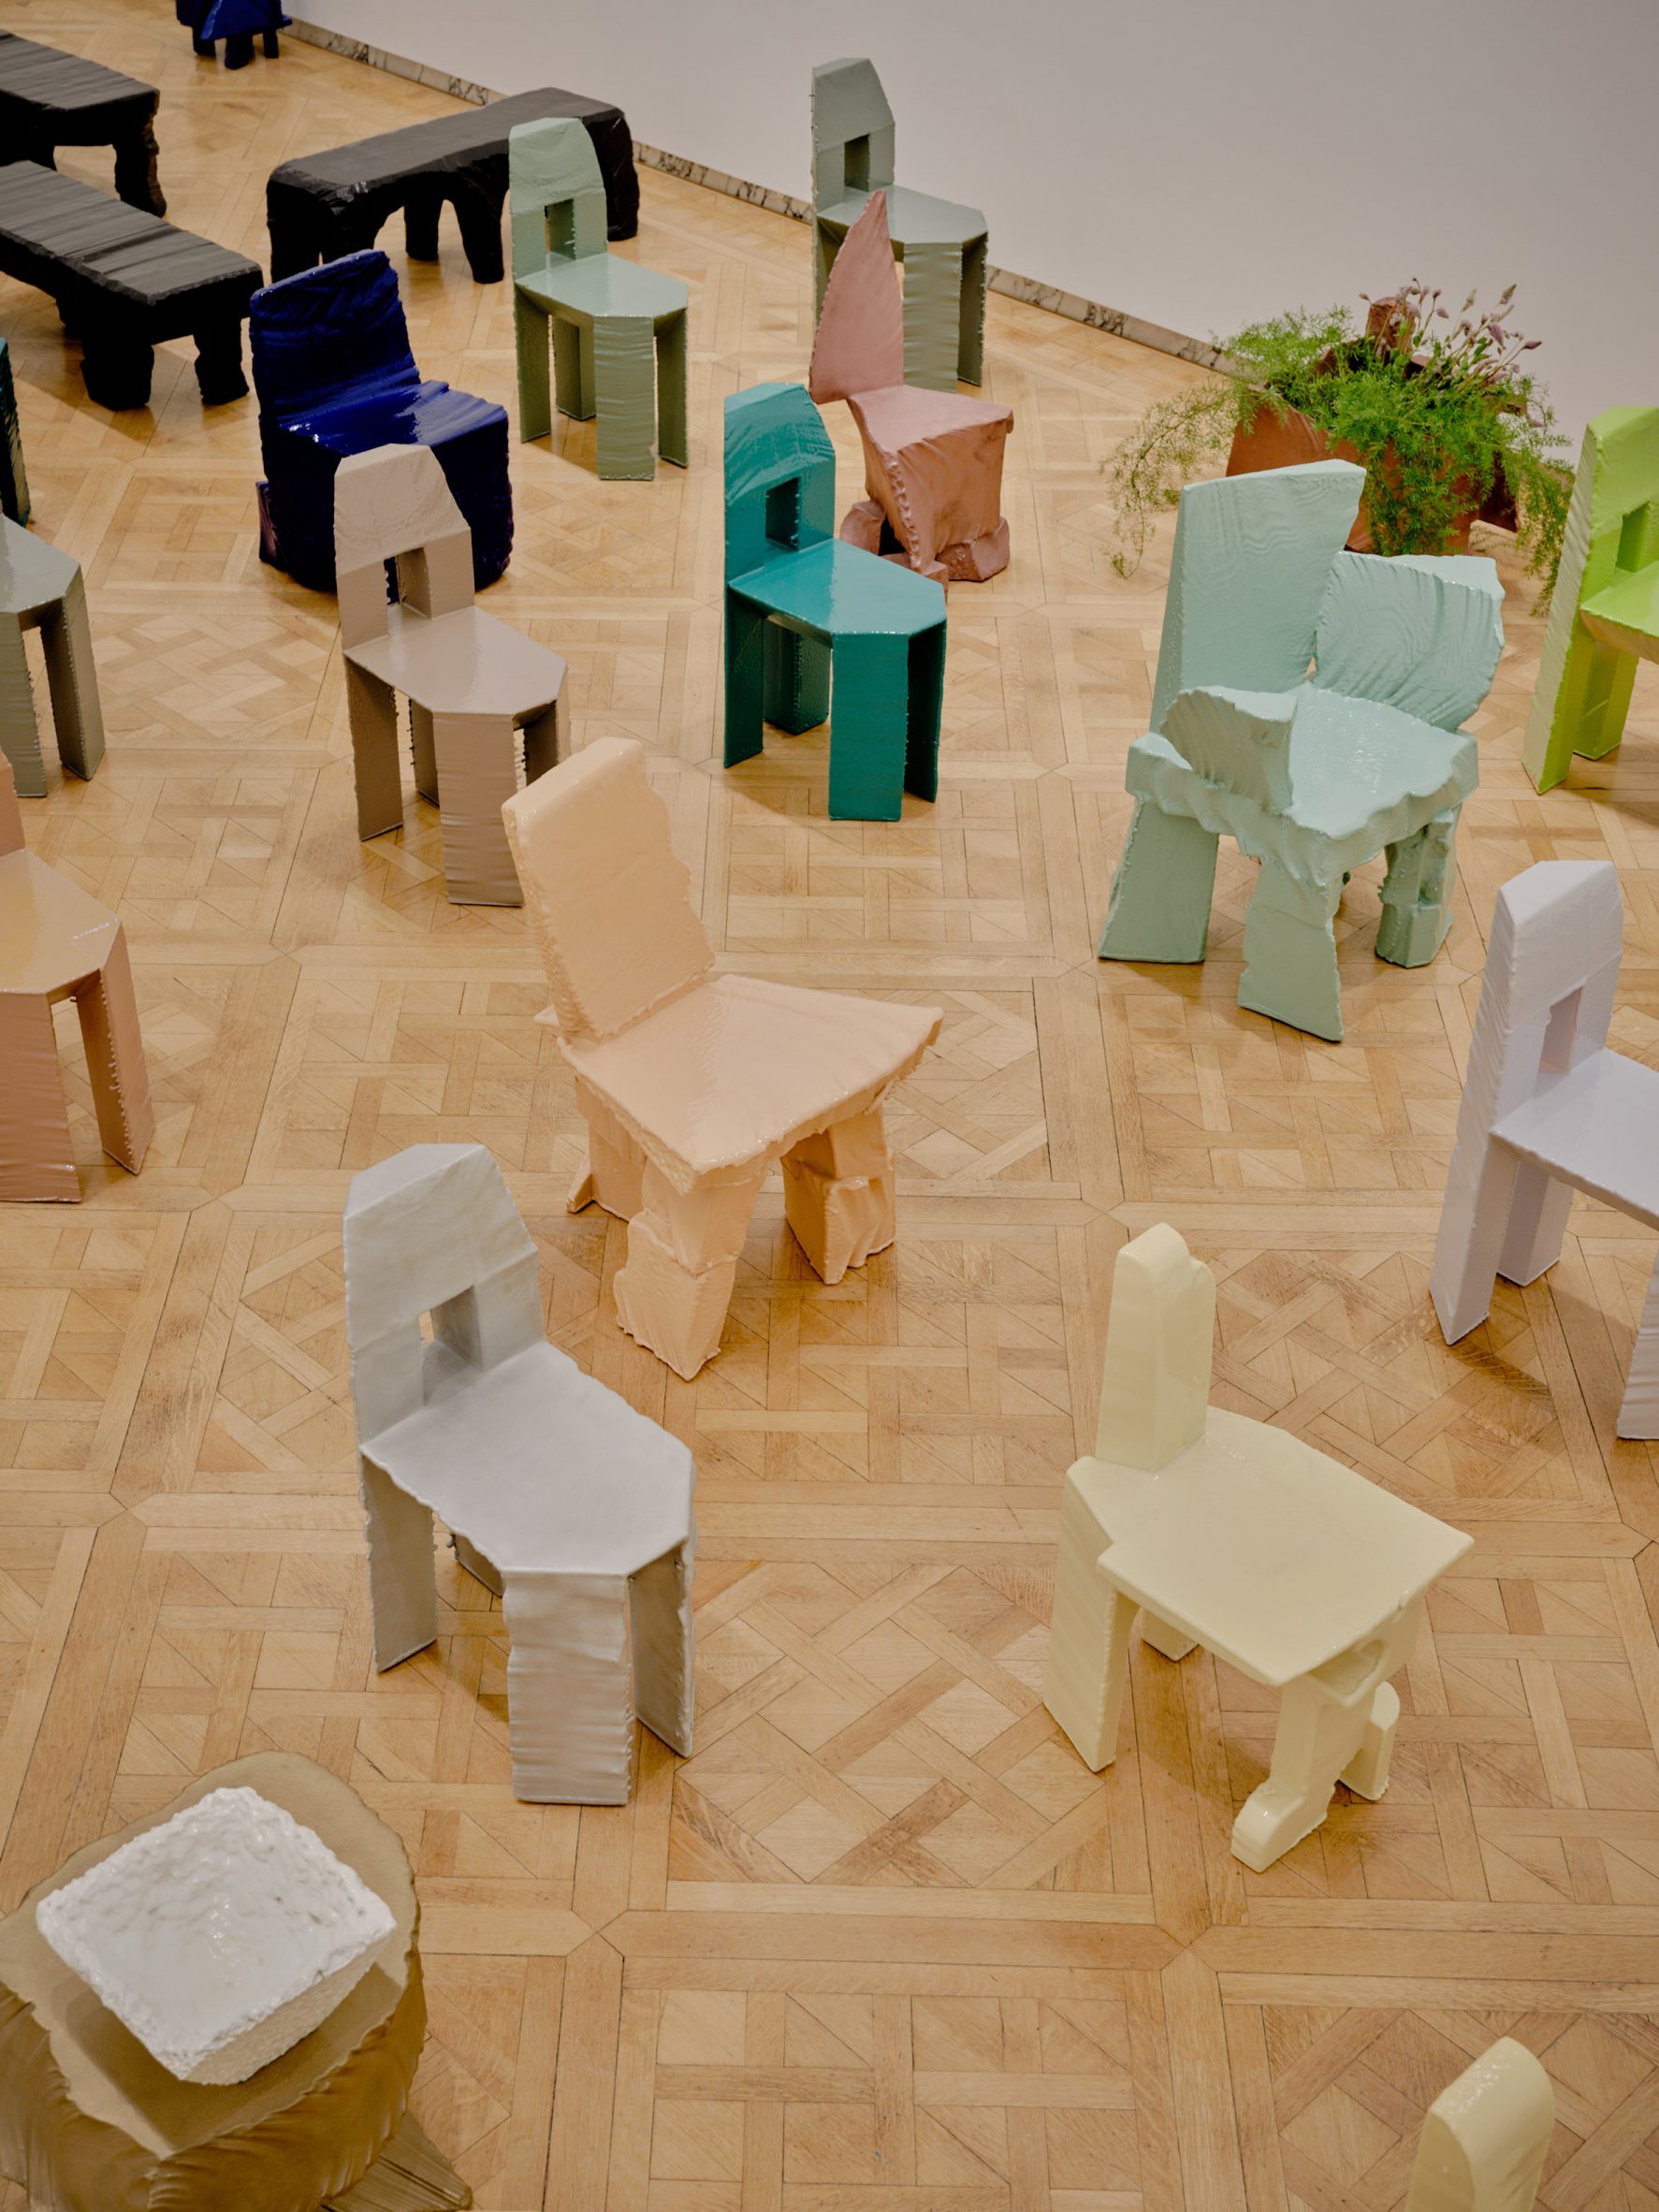 Max Lamb chairs on wooden floors